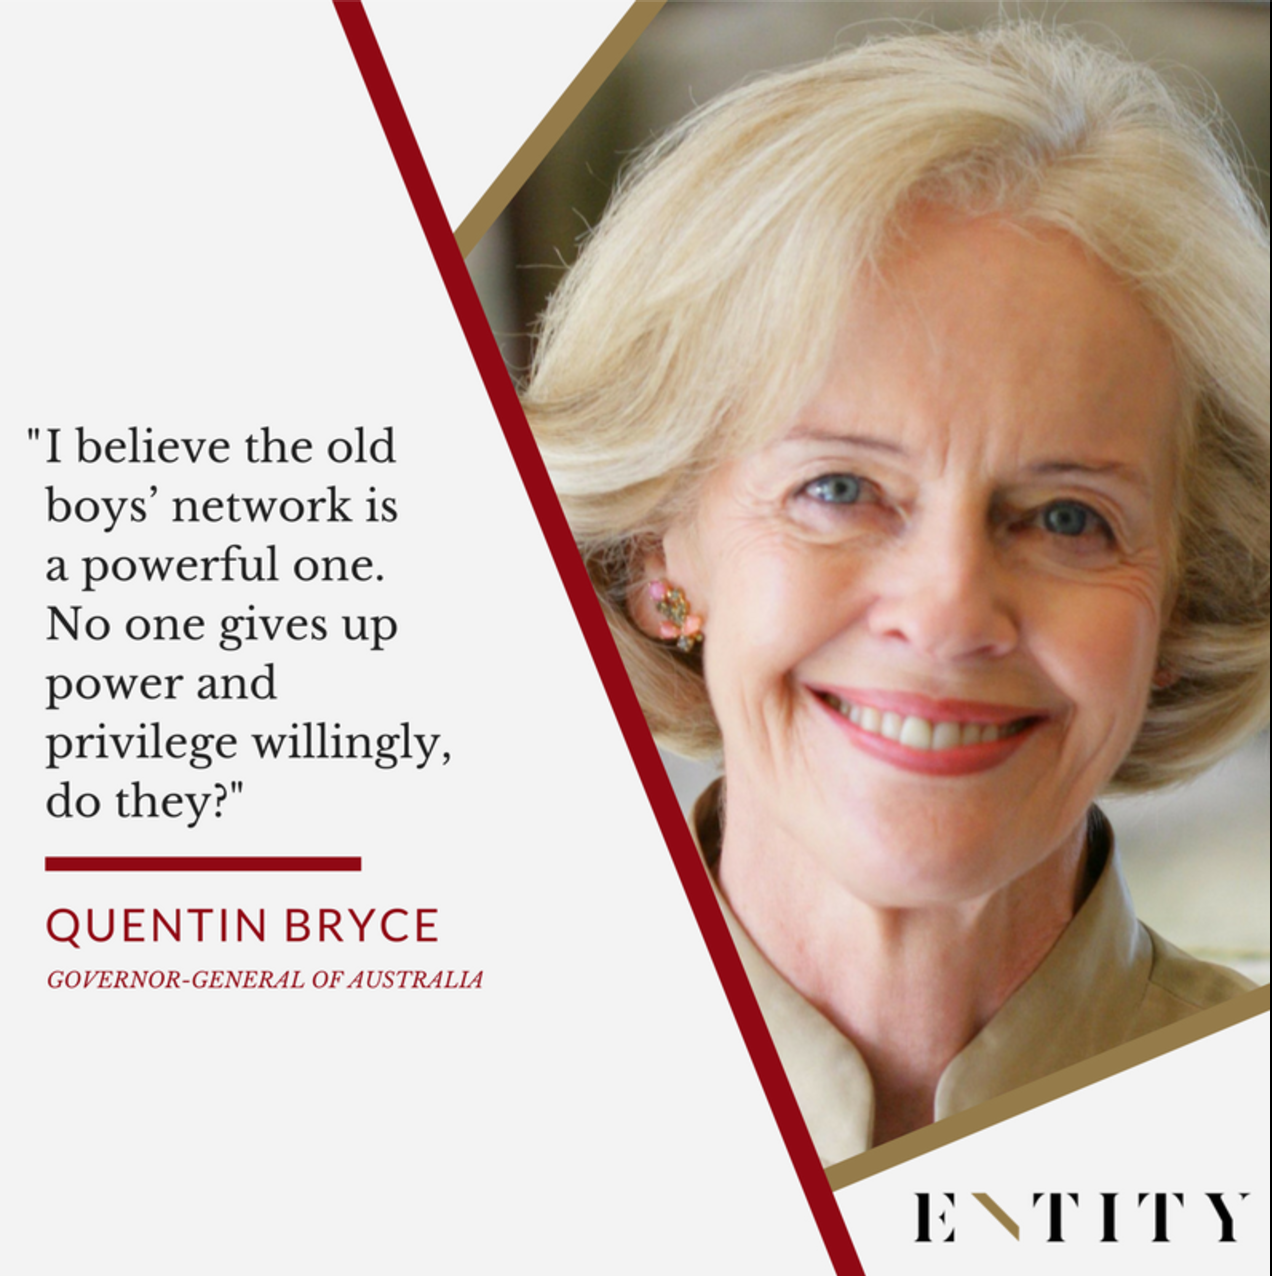 Quentin Bryce QT on Entity. 